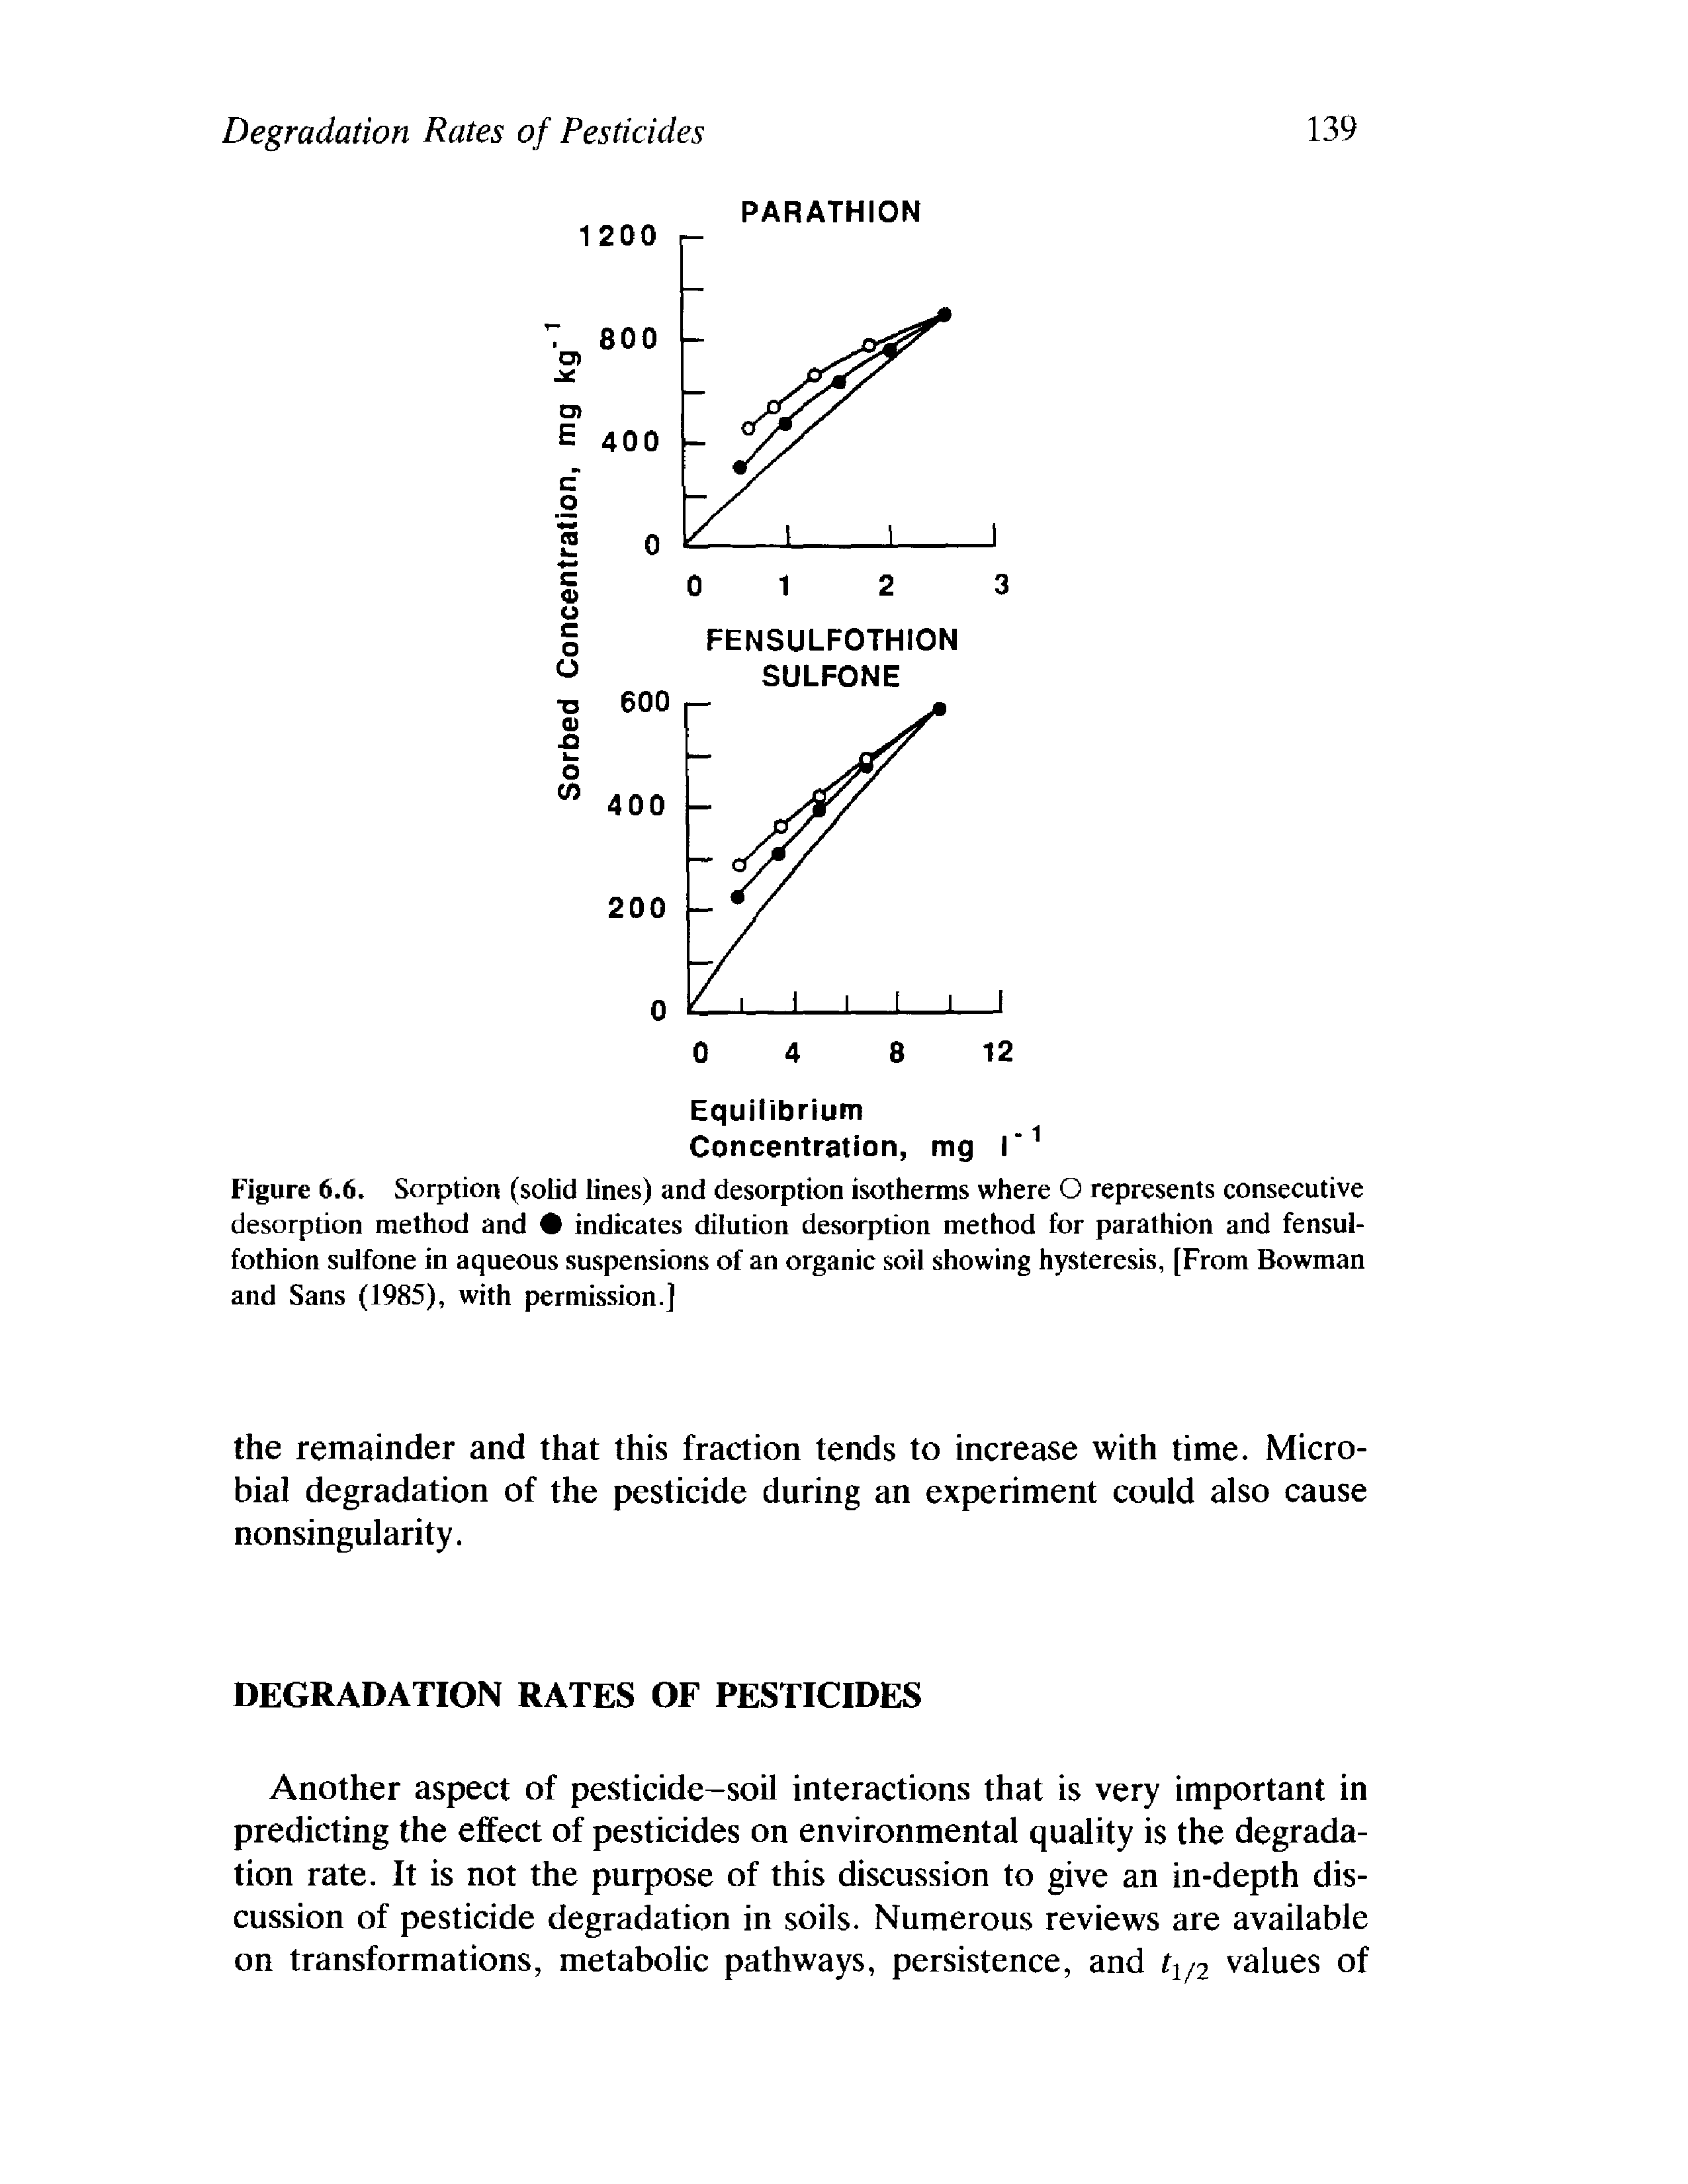 Figure 6.6. Sorption (solid lines) and desorption isotherms where O represents consecutive desorption method and indicates dilution desorption method for parathion and fensul-fothion sulfone in aqueous suspensions of an organic soil showing hysteresis, [From Bowman and Sans (1985), with permission.]...